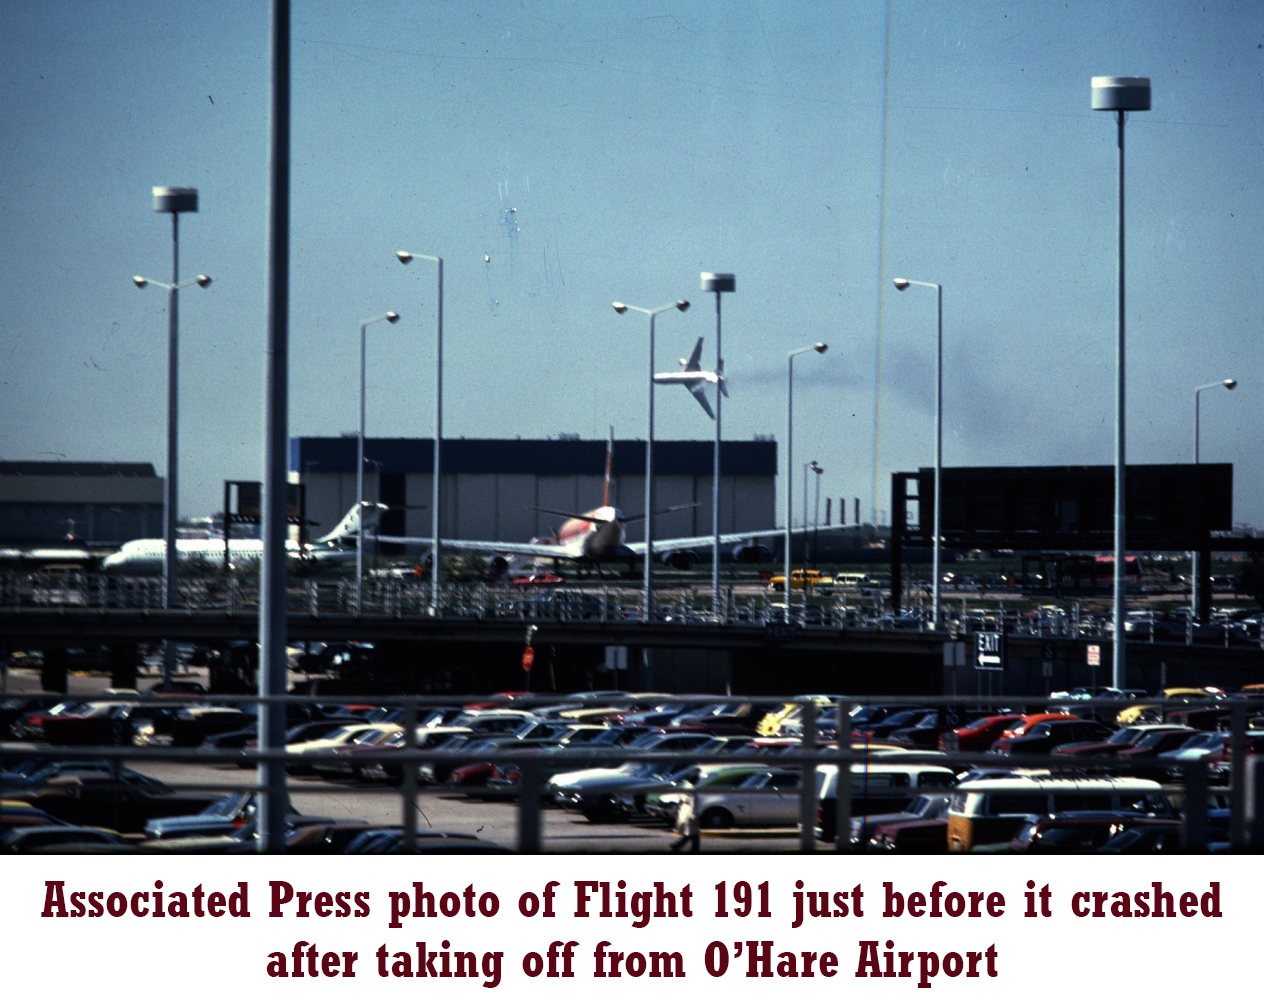 Associated Press photo of Flight 191 just before it crashed